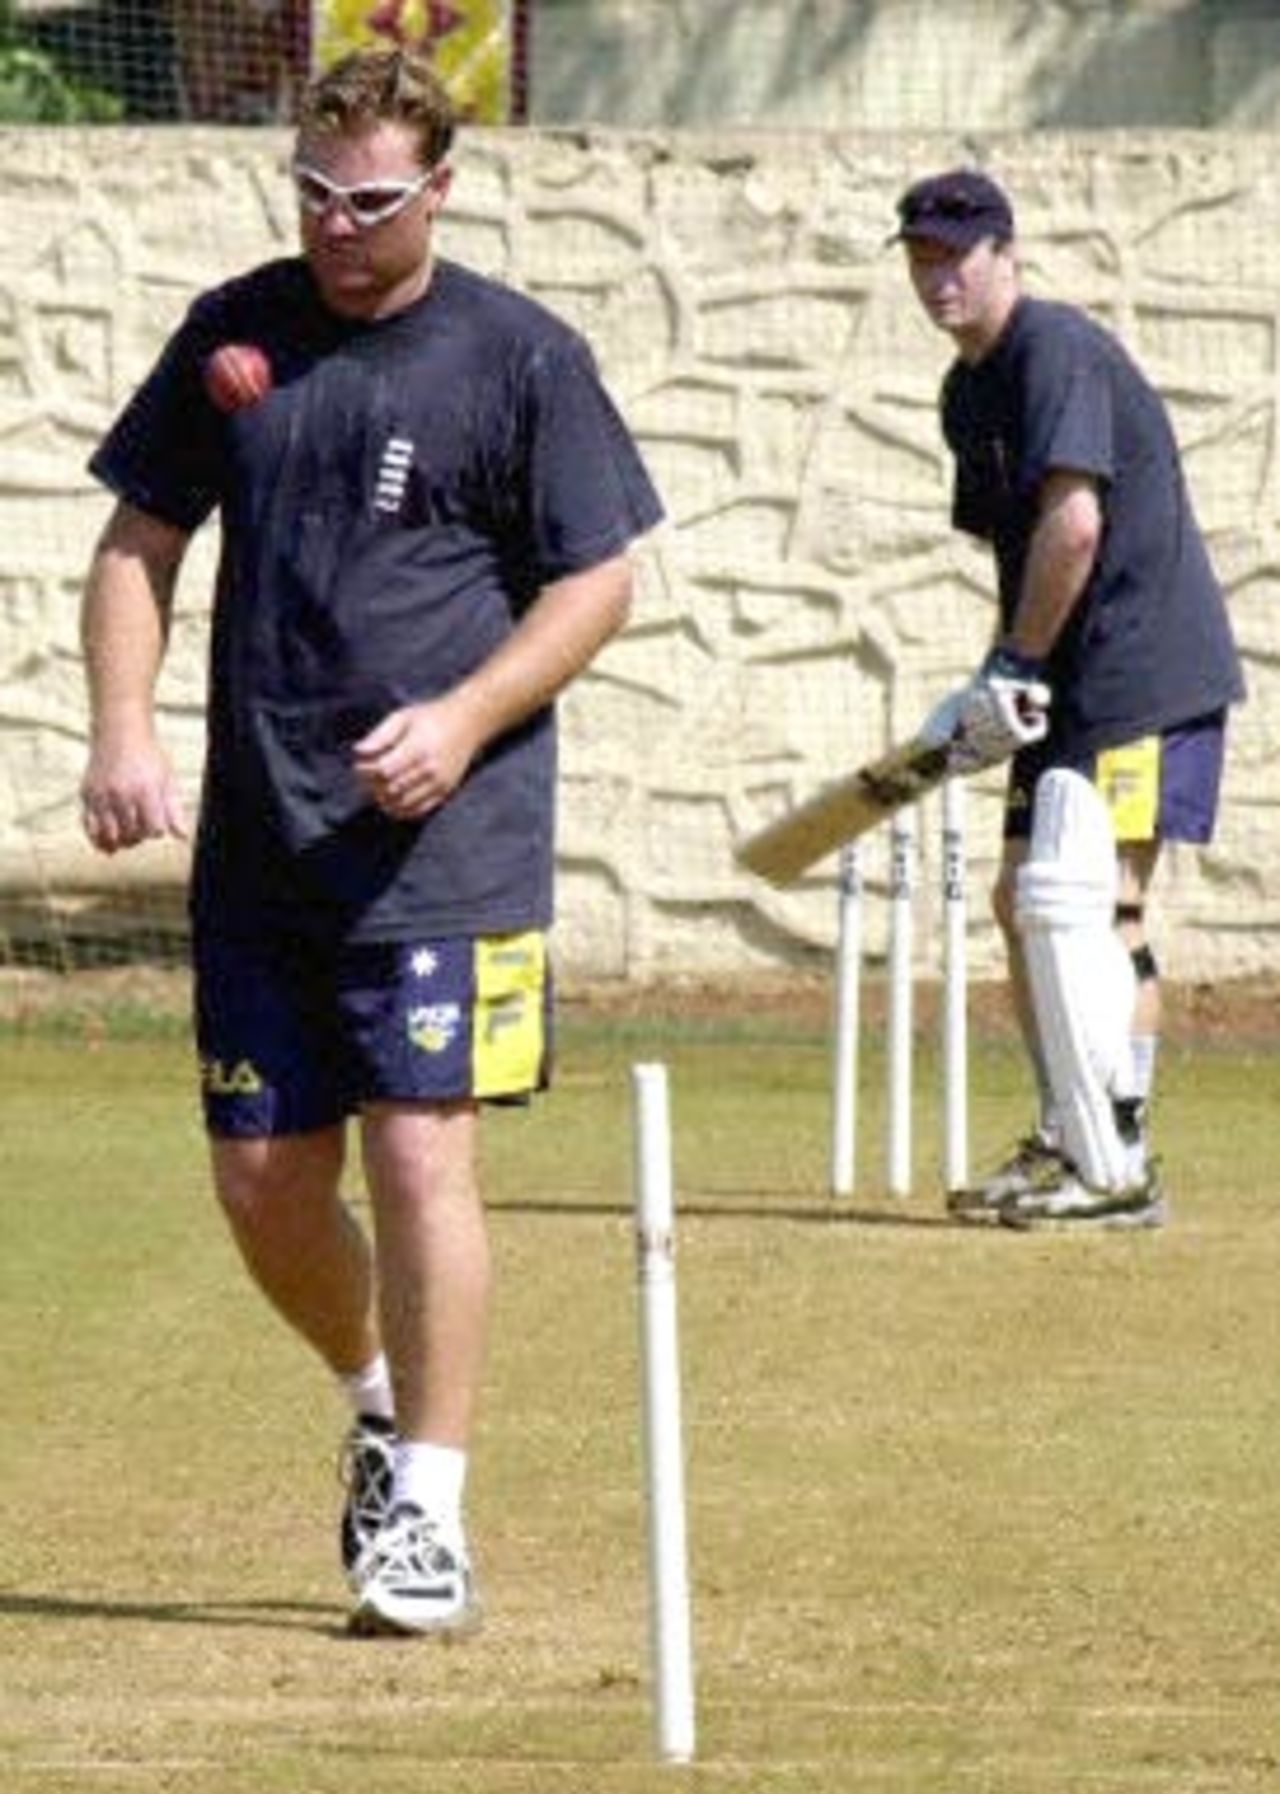 Australian leg spinner Shane Warne tosses the ball before his next delivery to team-mate Steve Waugh (R), 15 February 2001 in Mumbai,during a practice session. Warne will relish his return meeting with his greatest tormentor Sachin Tendulkar who had wrecked Warne's bowling in a Test series in India three years ago.